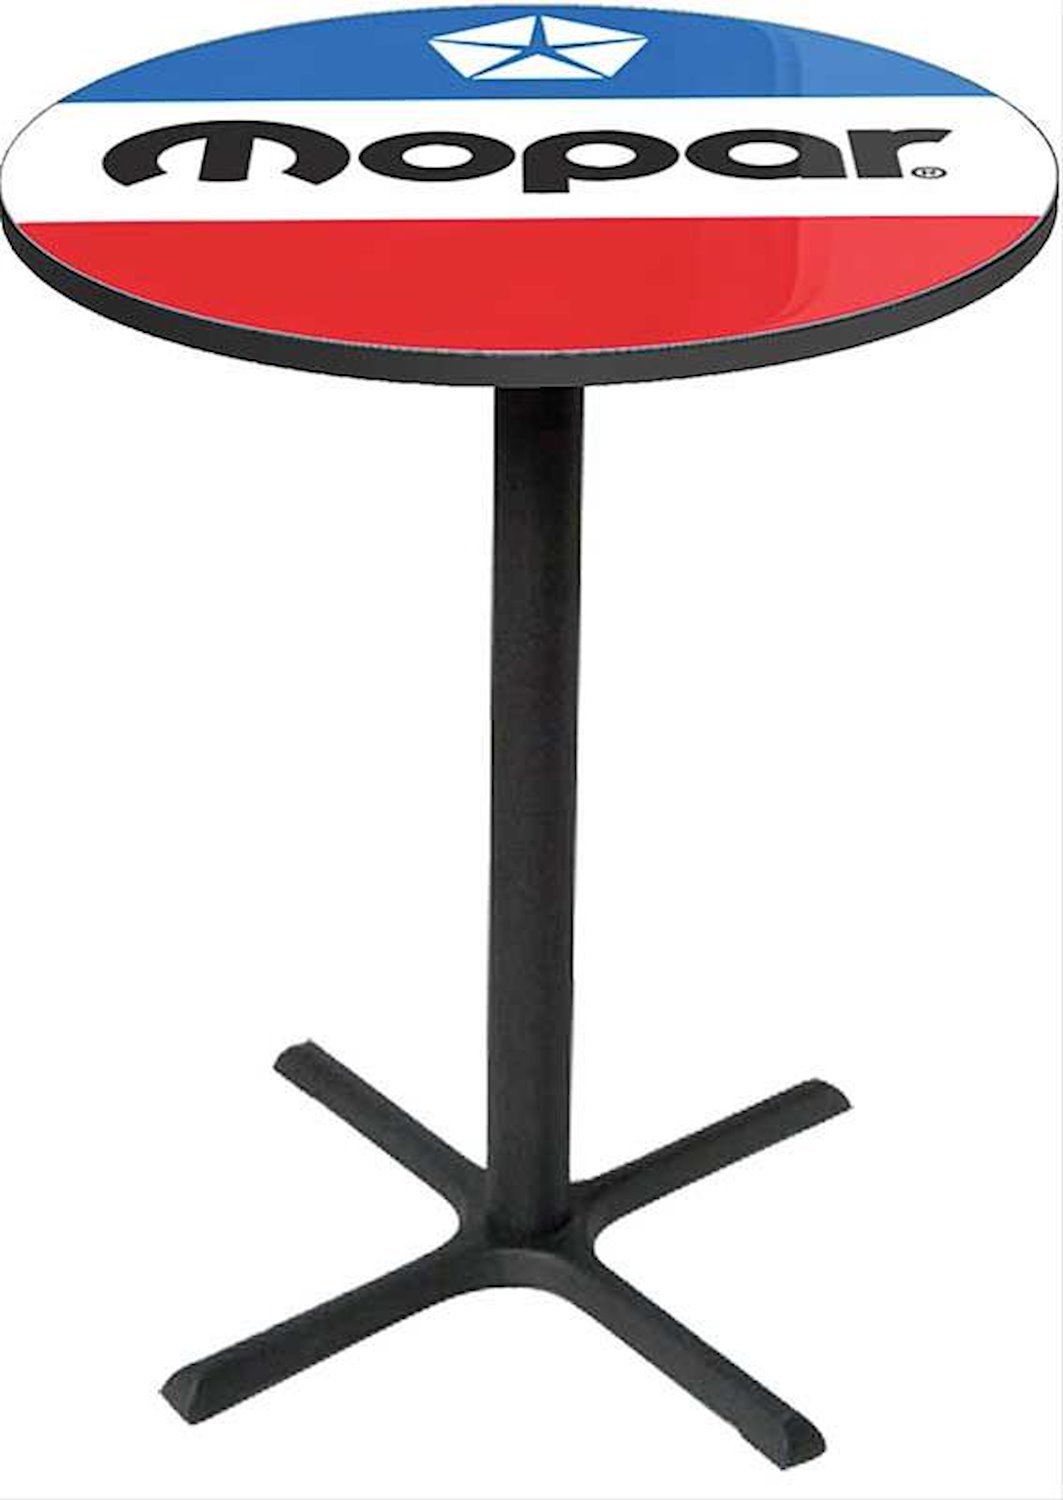 MD671107 Pub Table With Black Base 1972-84 Style Red White And Blue Mopar Logo